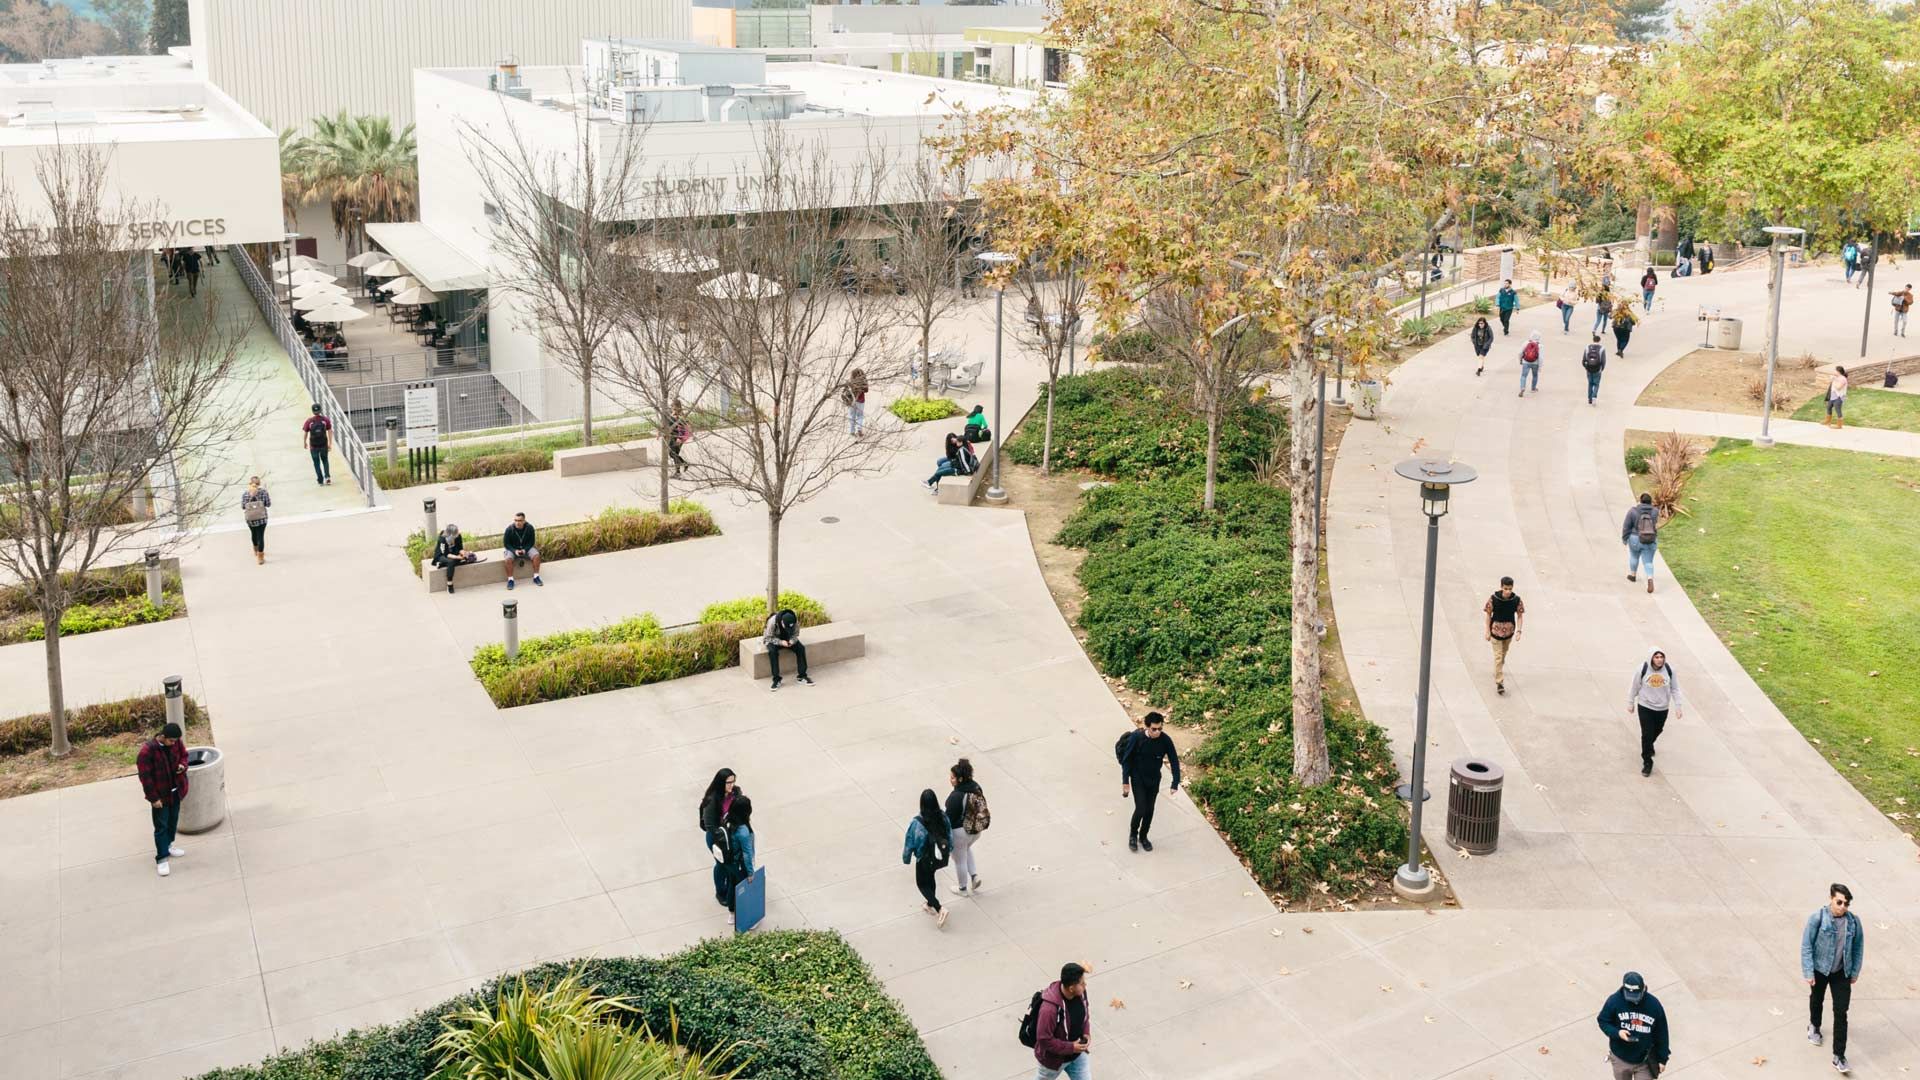 A college campus with green space and walkways populated by students wearing backpacks